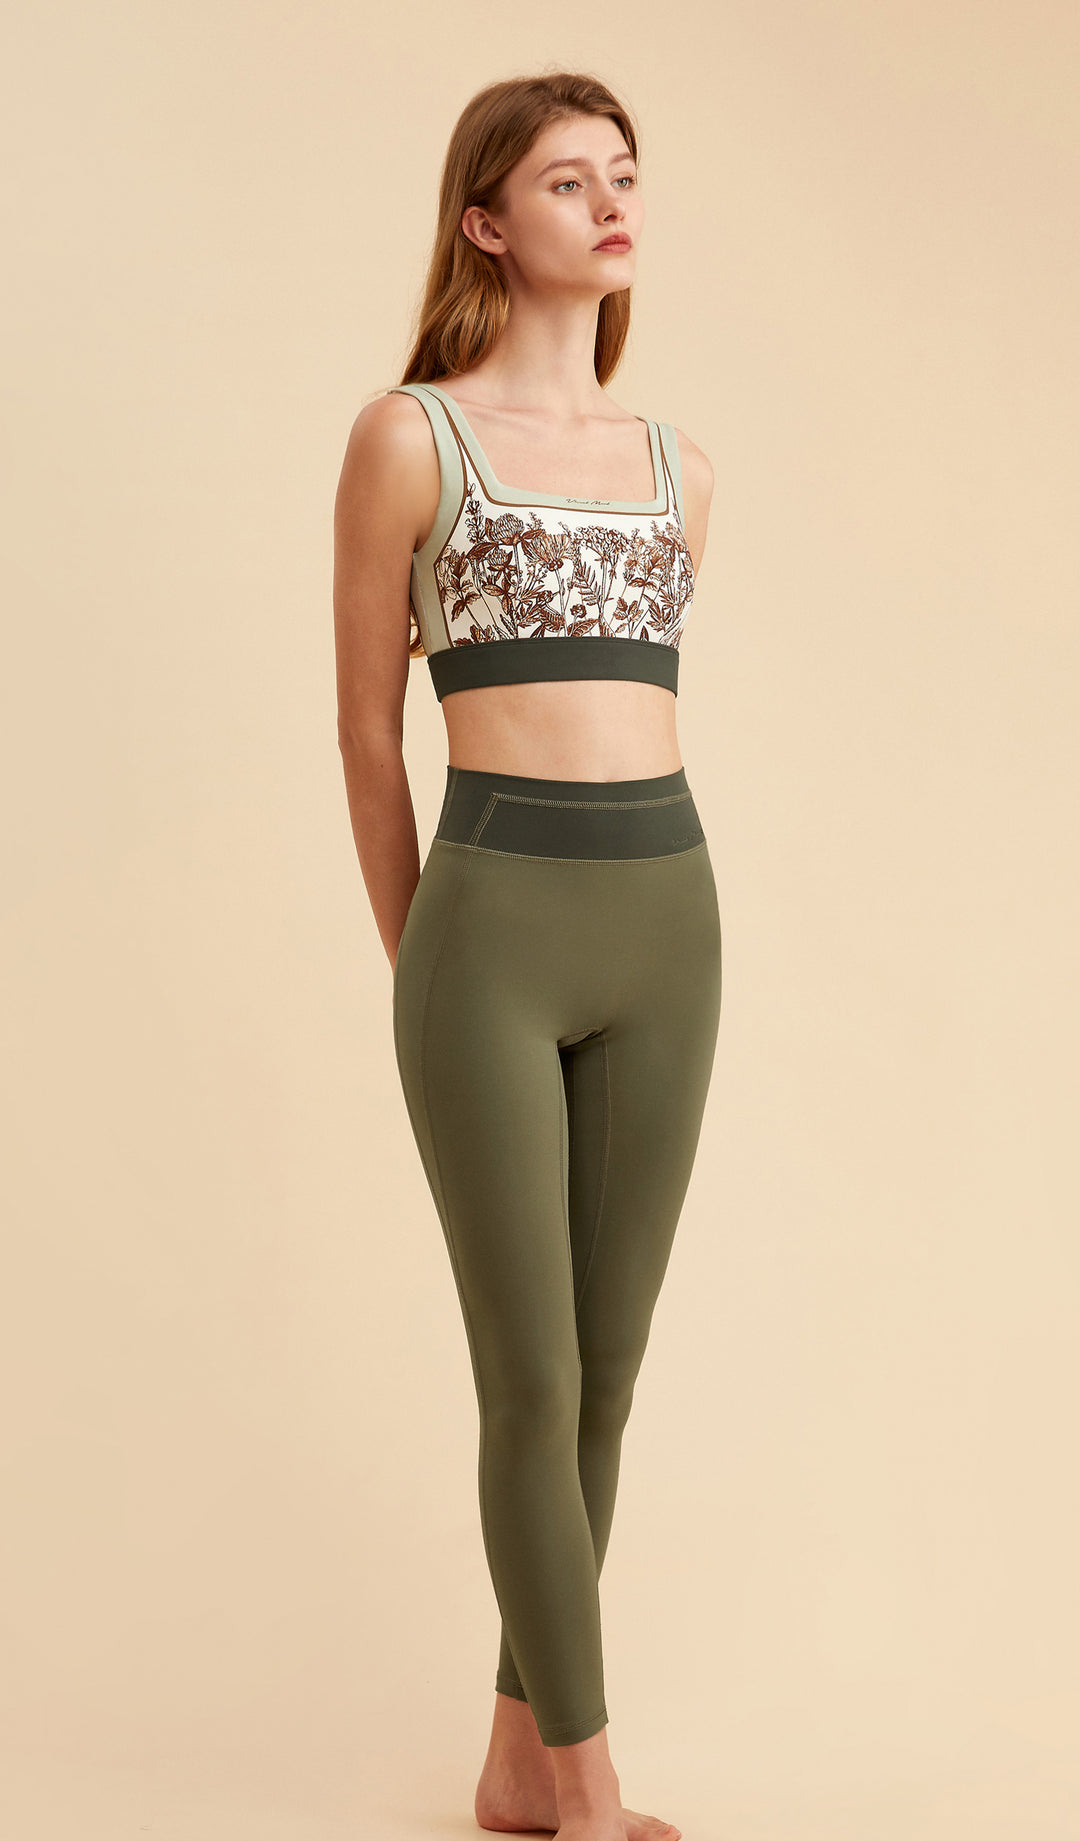 Yoga Tops With Built In Bra Canada Map